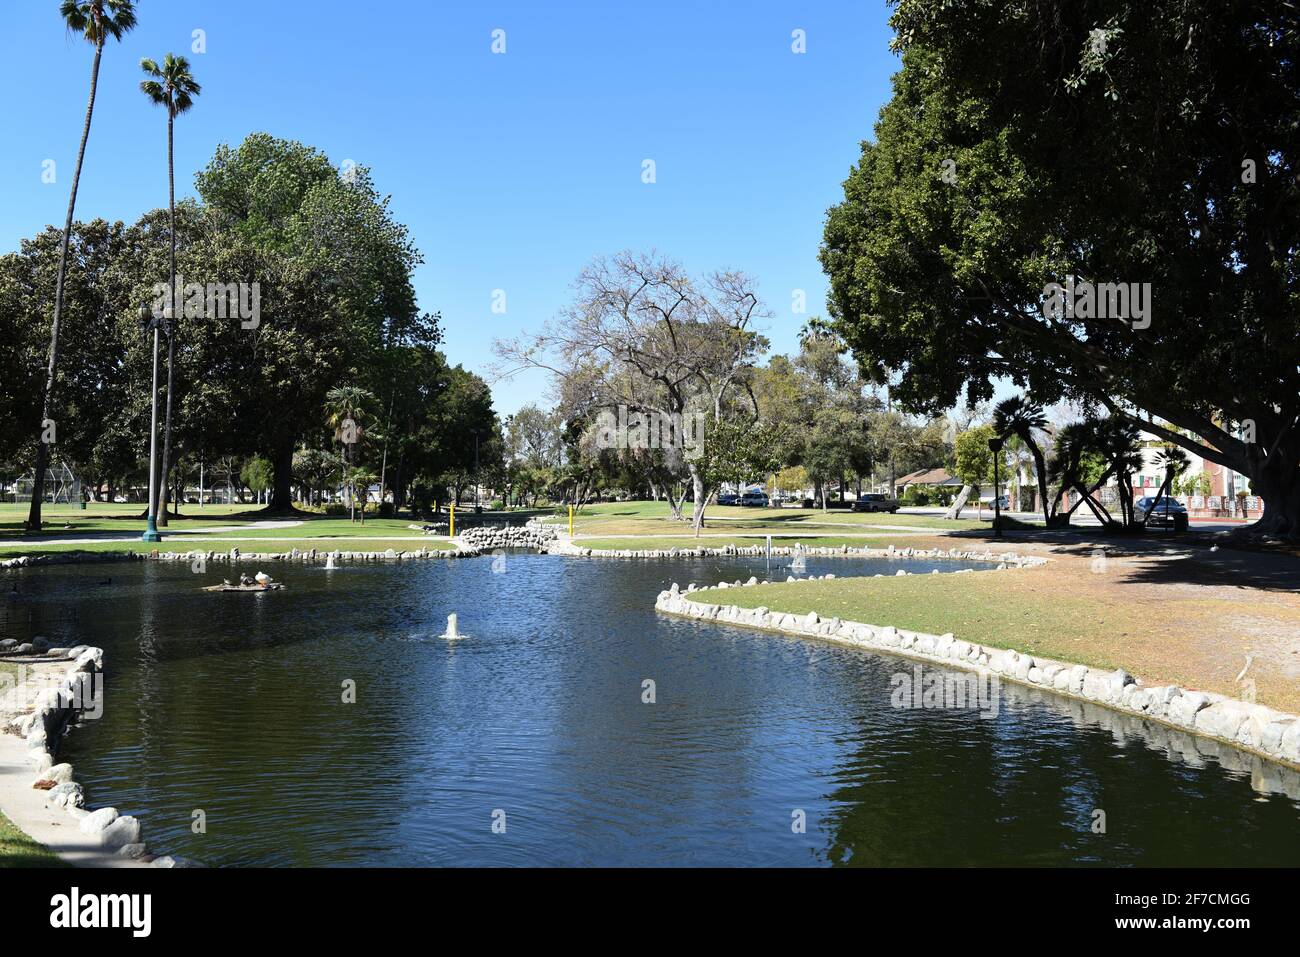 ANAHEIM, CALIFORNIA - 31 MAR 2021: Pearson Pond in the park named in honor of former Mayor Charles A. Pearson Stock Photo